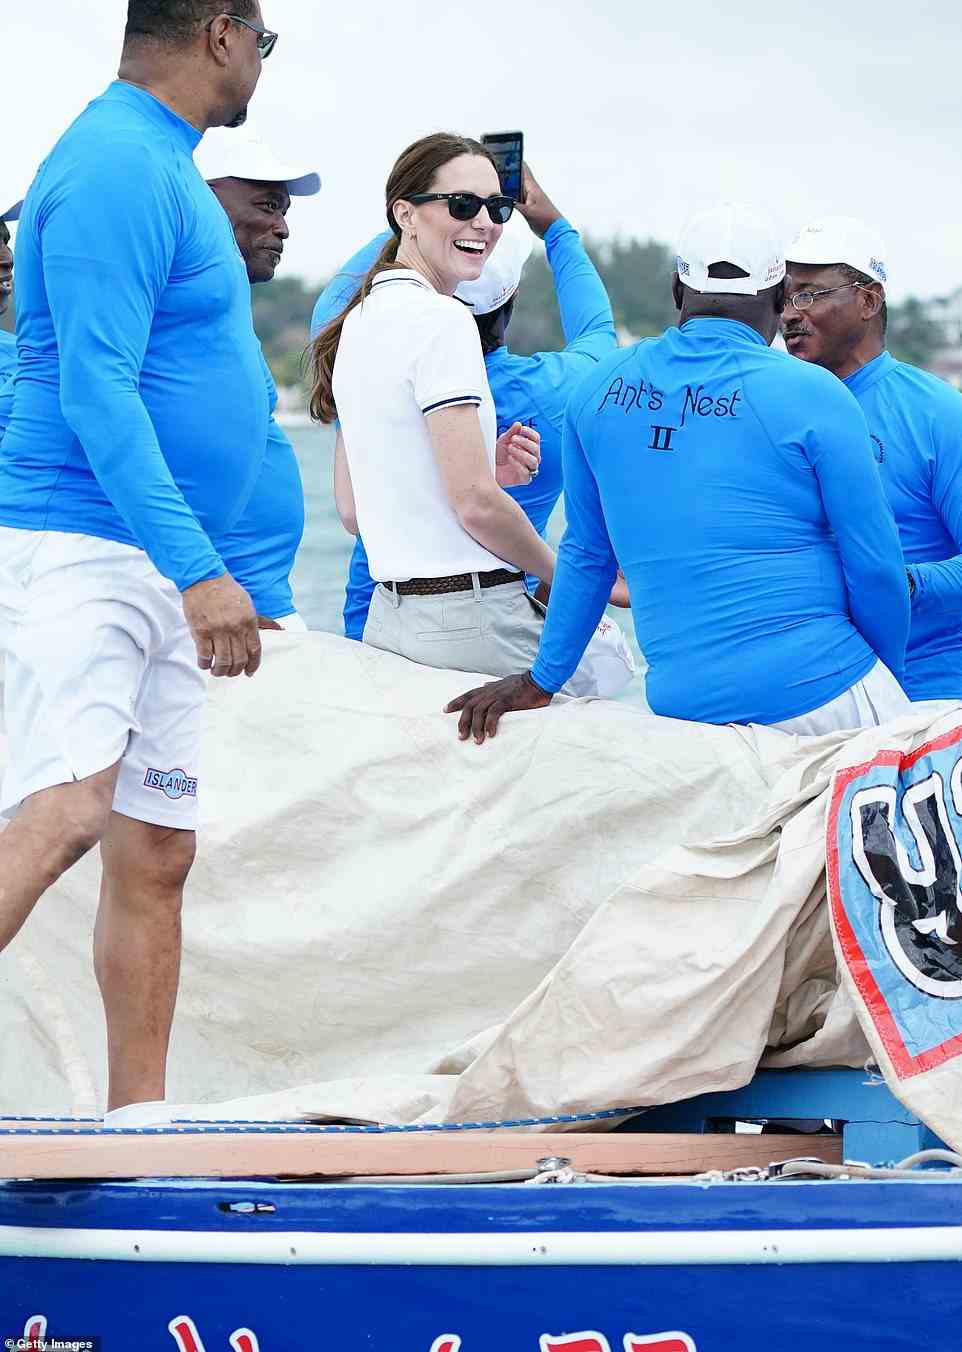 The duchess is pictured onboard a boat from the Bahamas Platinum Jubilee Sailing Regatta